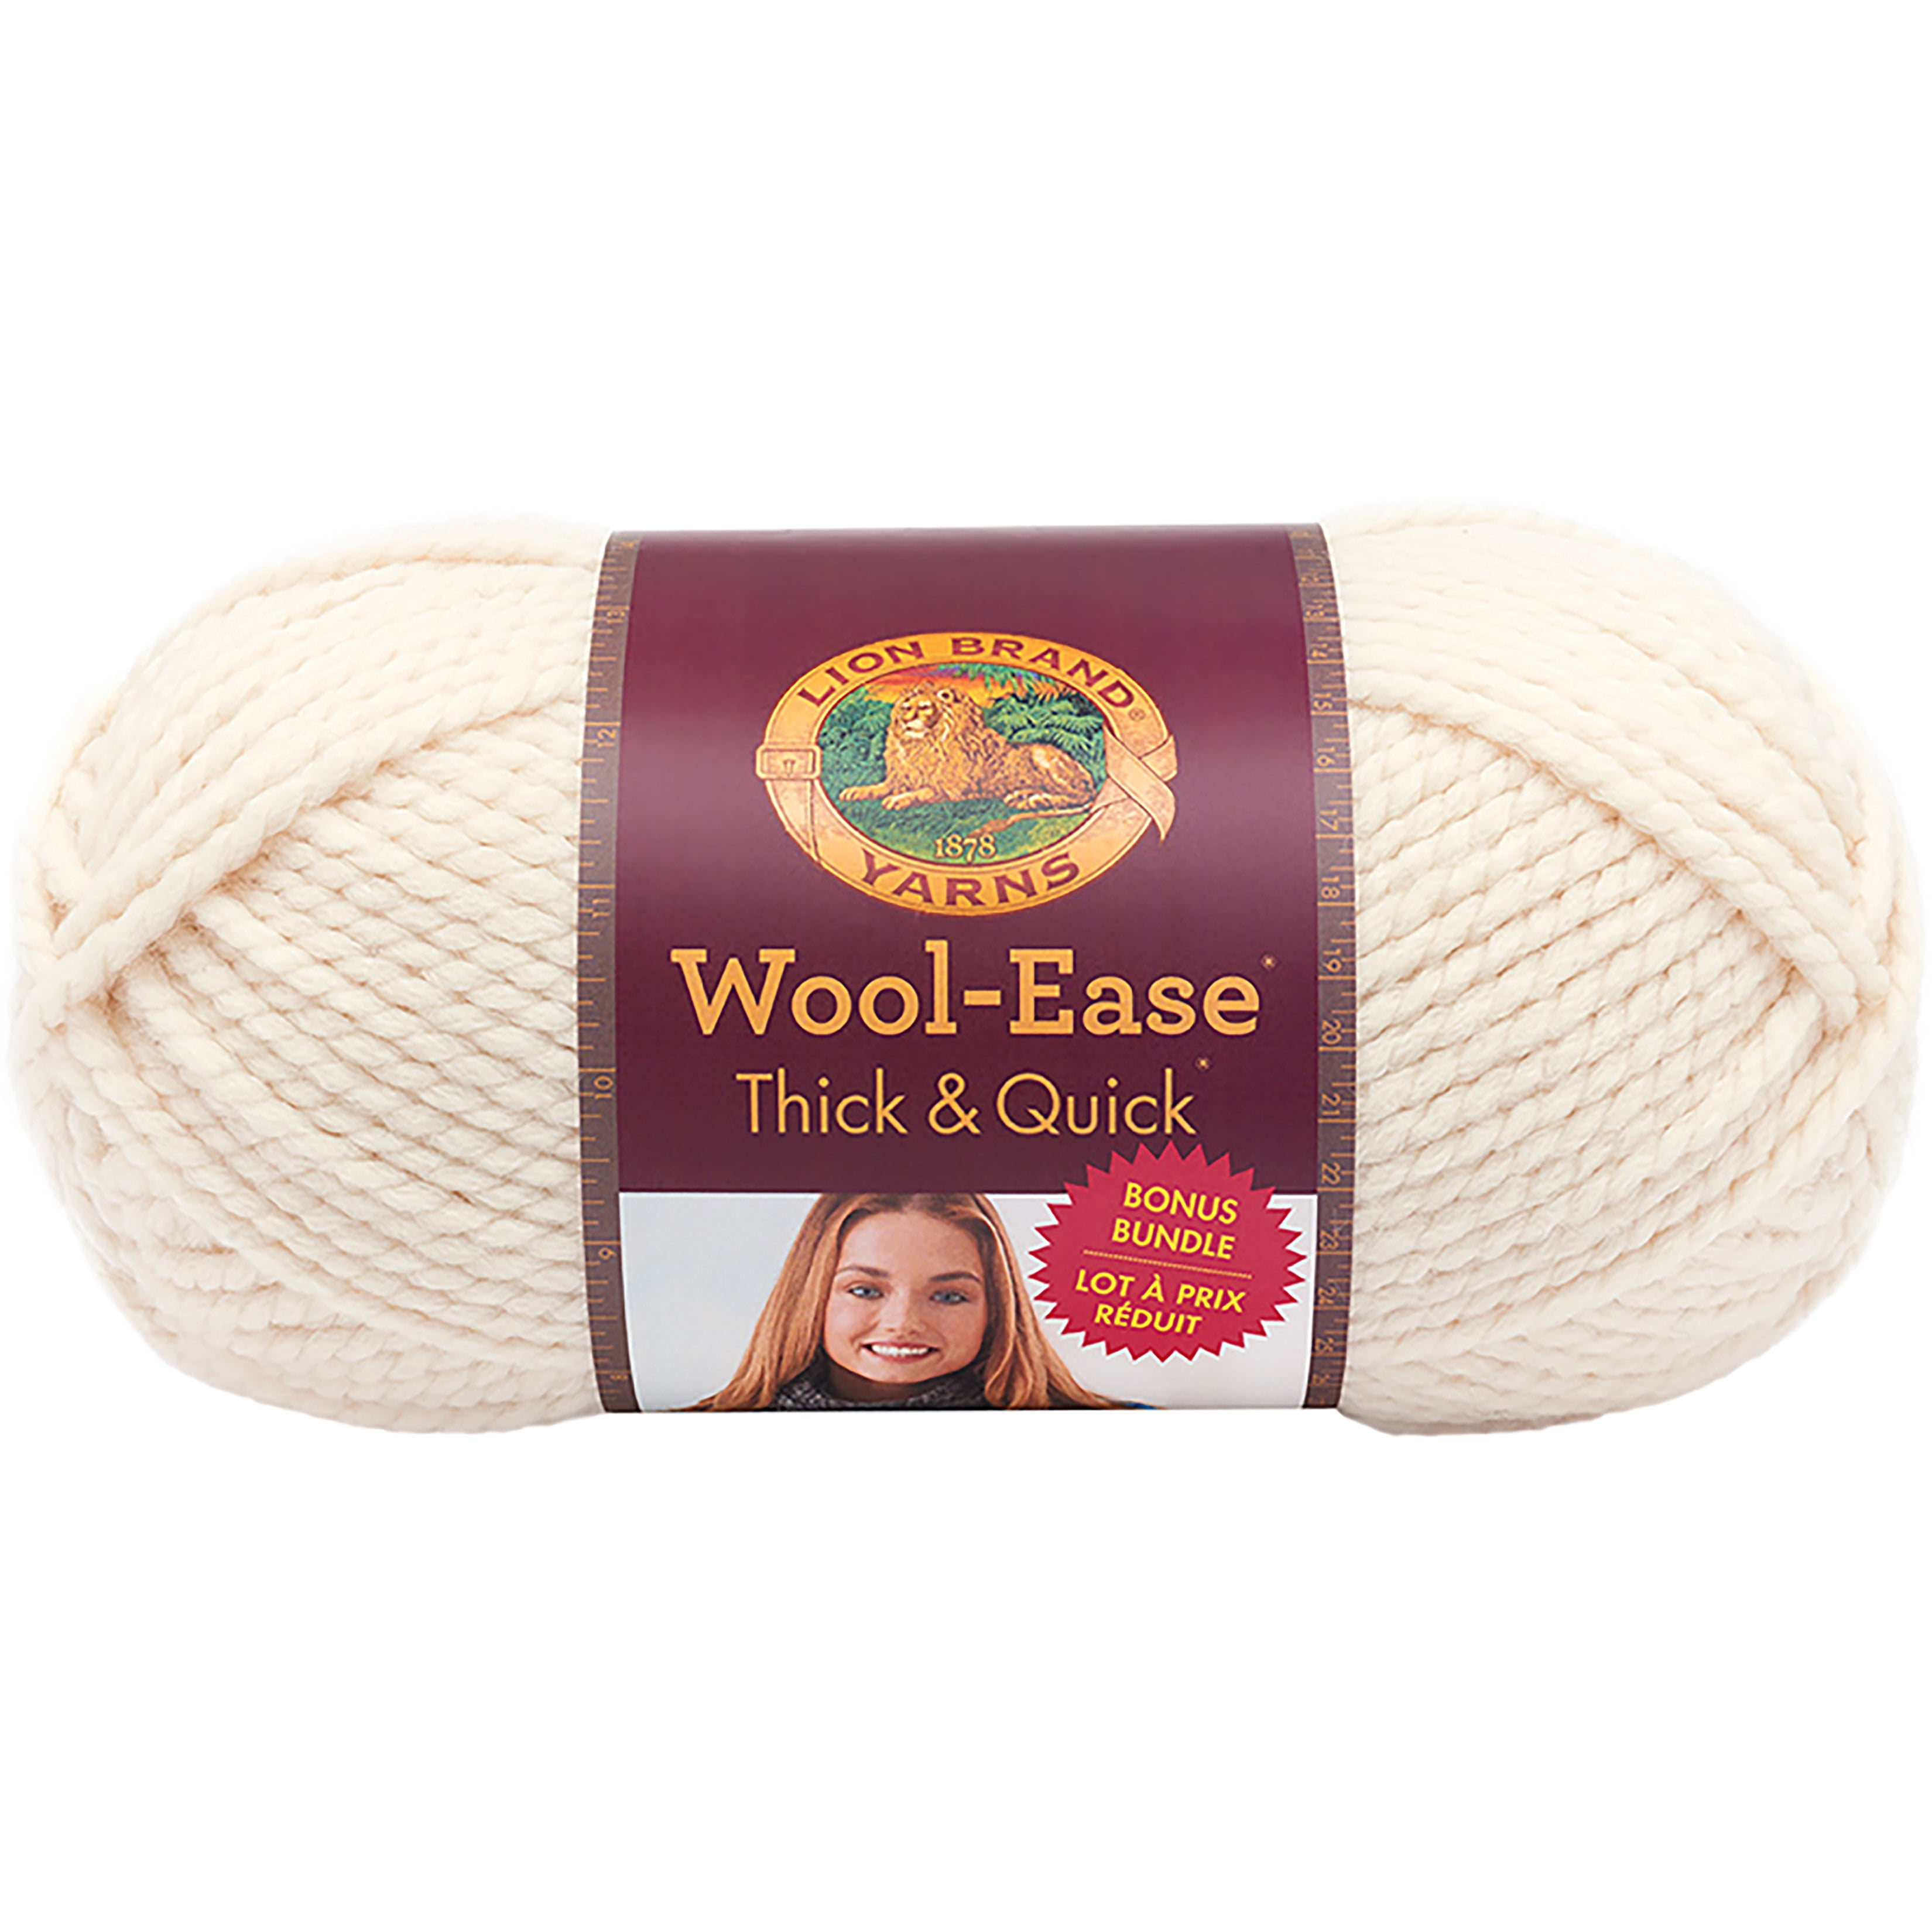 Lion Brand Wool-Ease Thick & Quick Yarn-Carousel, 1 count - Food 4 Less